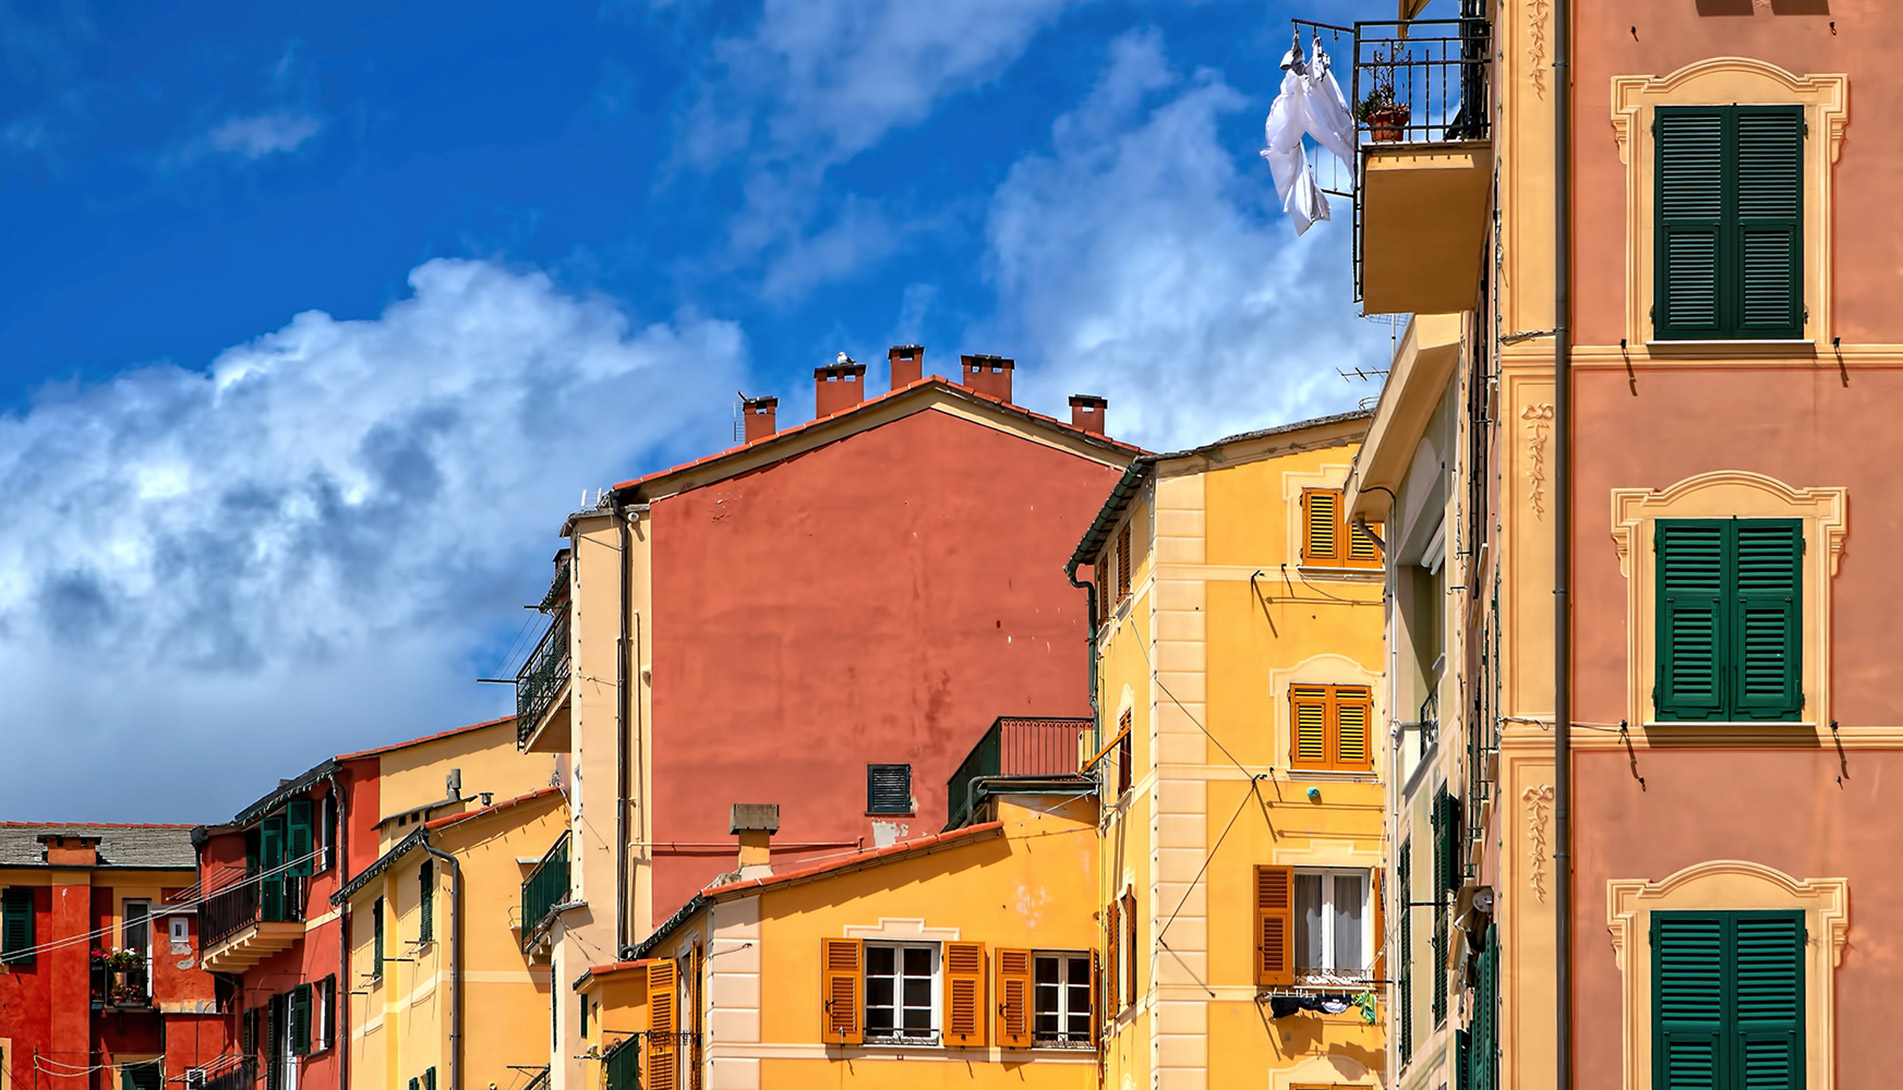 Colored houses in the village of Camogli